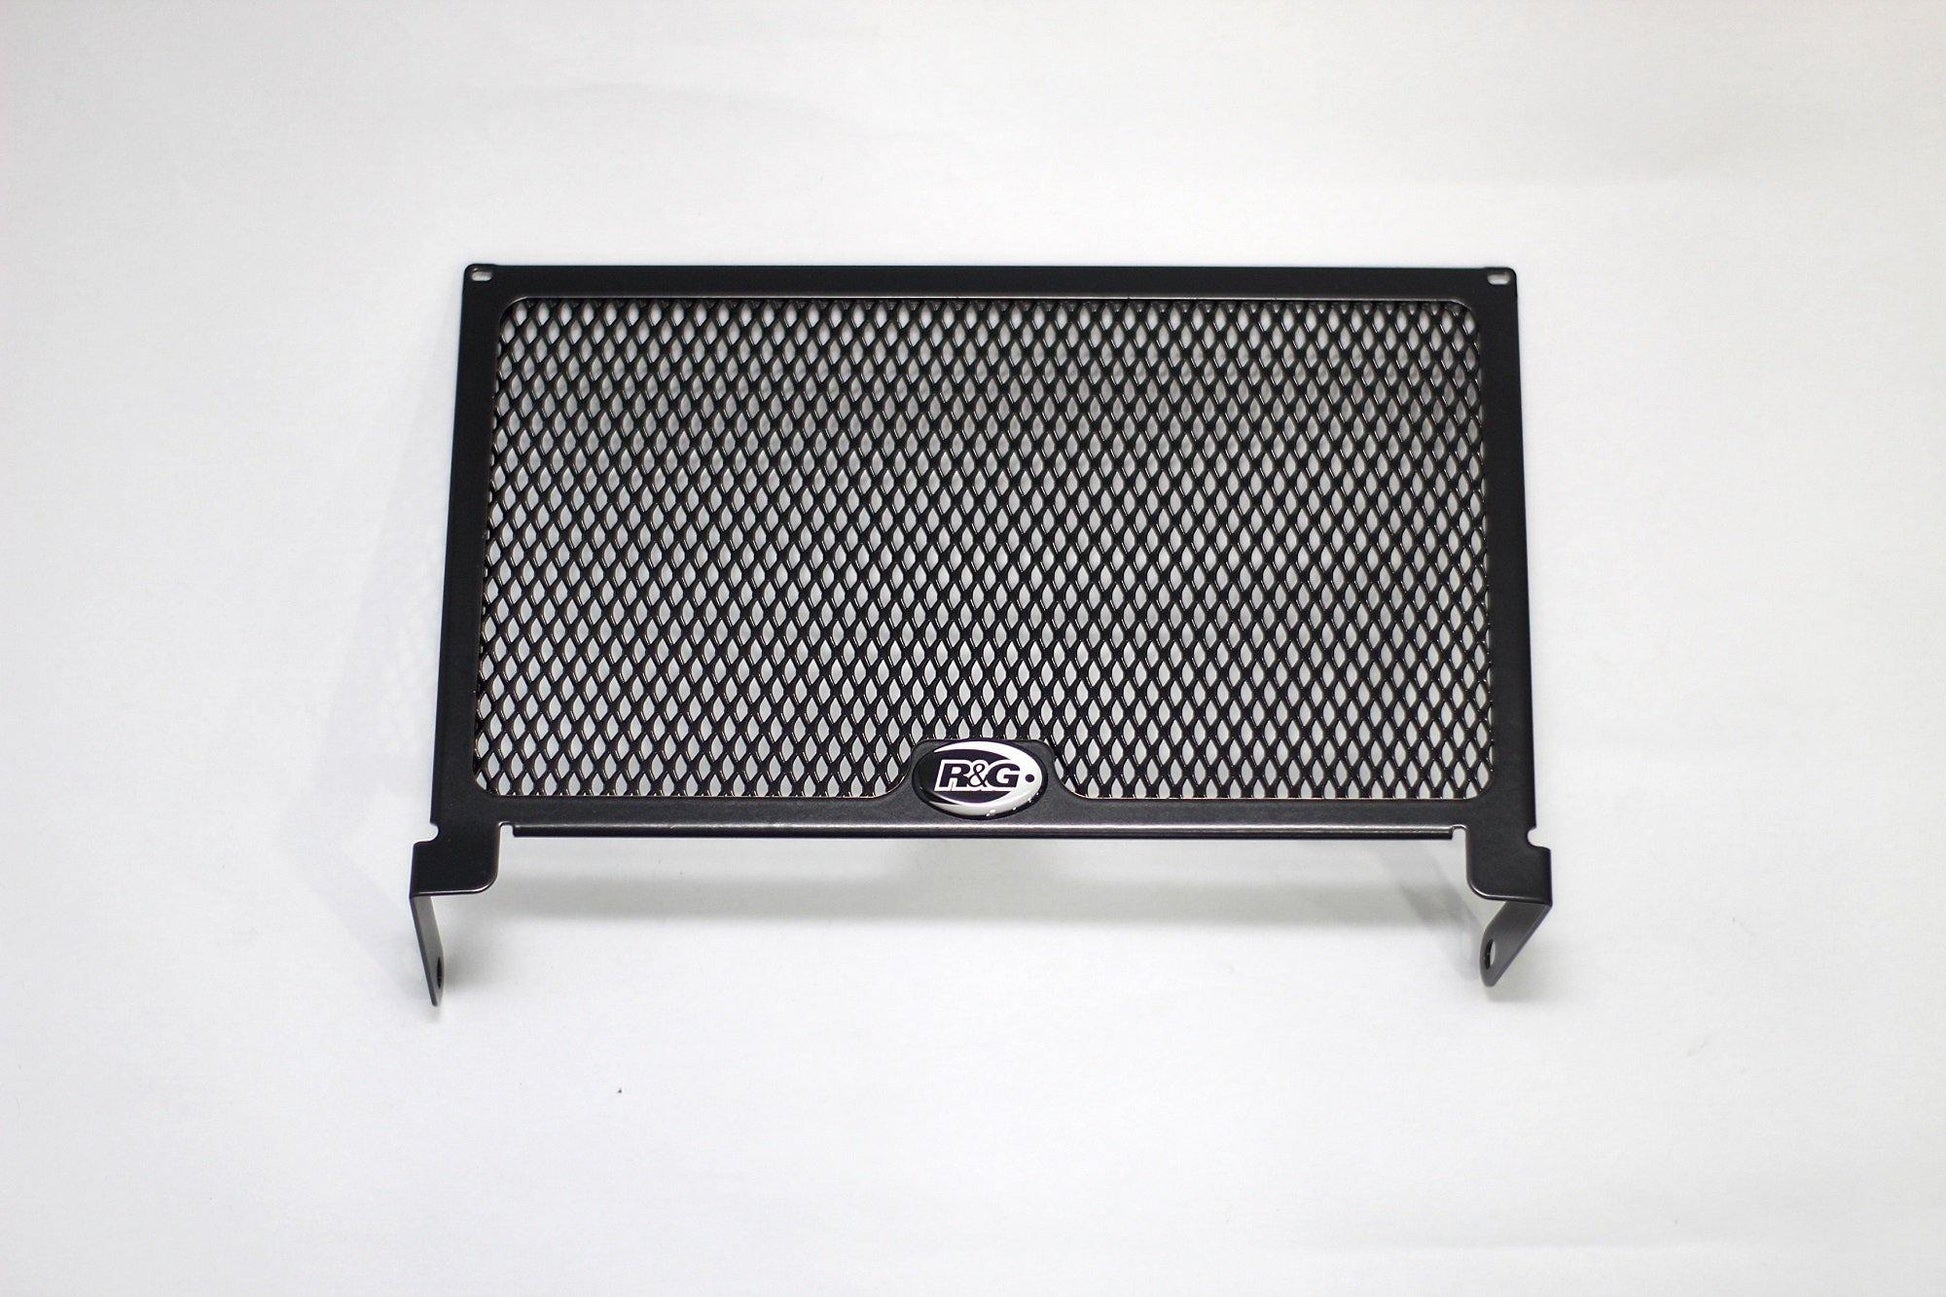 R&G Radiator Guards fits for Yamaha YZF-R25 ('14-) / YZF-R3 ('15-) / MT-25 / Yamaha MT-03 ('15-) Models - Durian Bikers